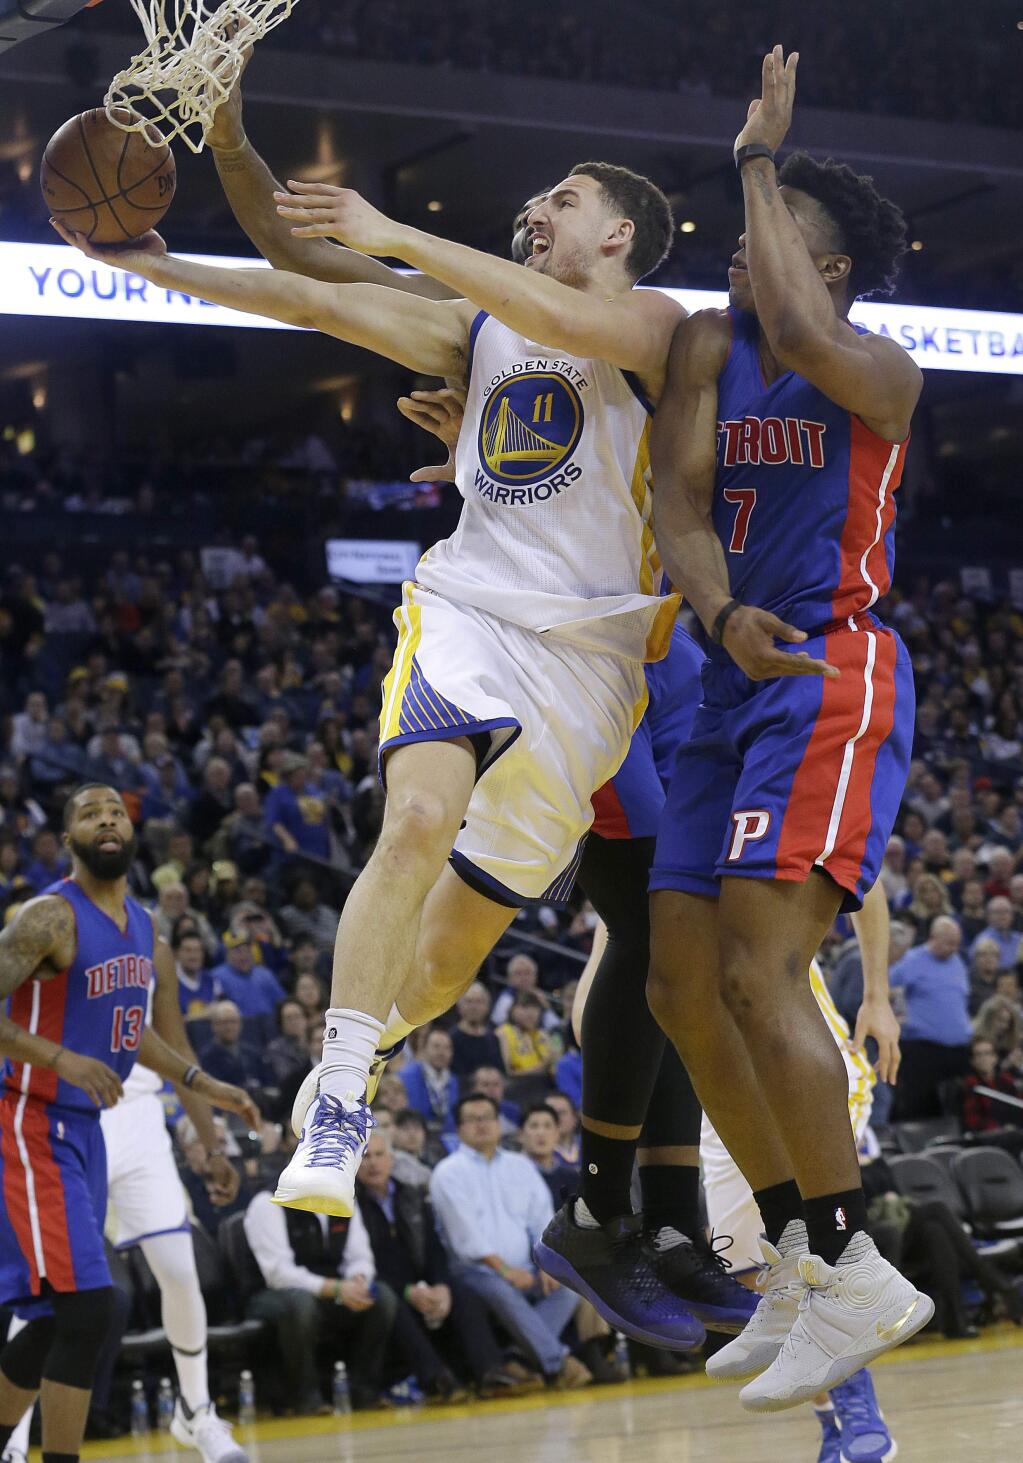 Golden State Warriors guard Klay Thompson (11) is fouled as he shoots against Detroit Pistons forward Stanley Johnson (7) and center Andre Drummond, rear, during the second half of an NBA basketball game in Oakland, Calif., Thursday, Jan. 12, 2017. (AP Photo/Jeff Chiu)